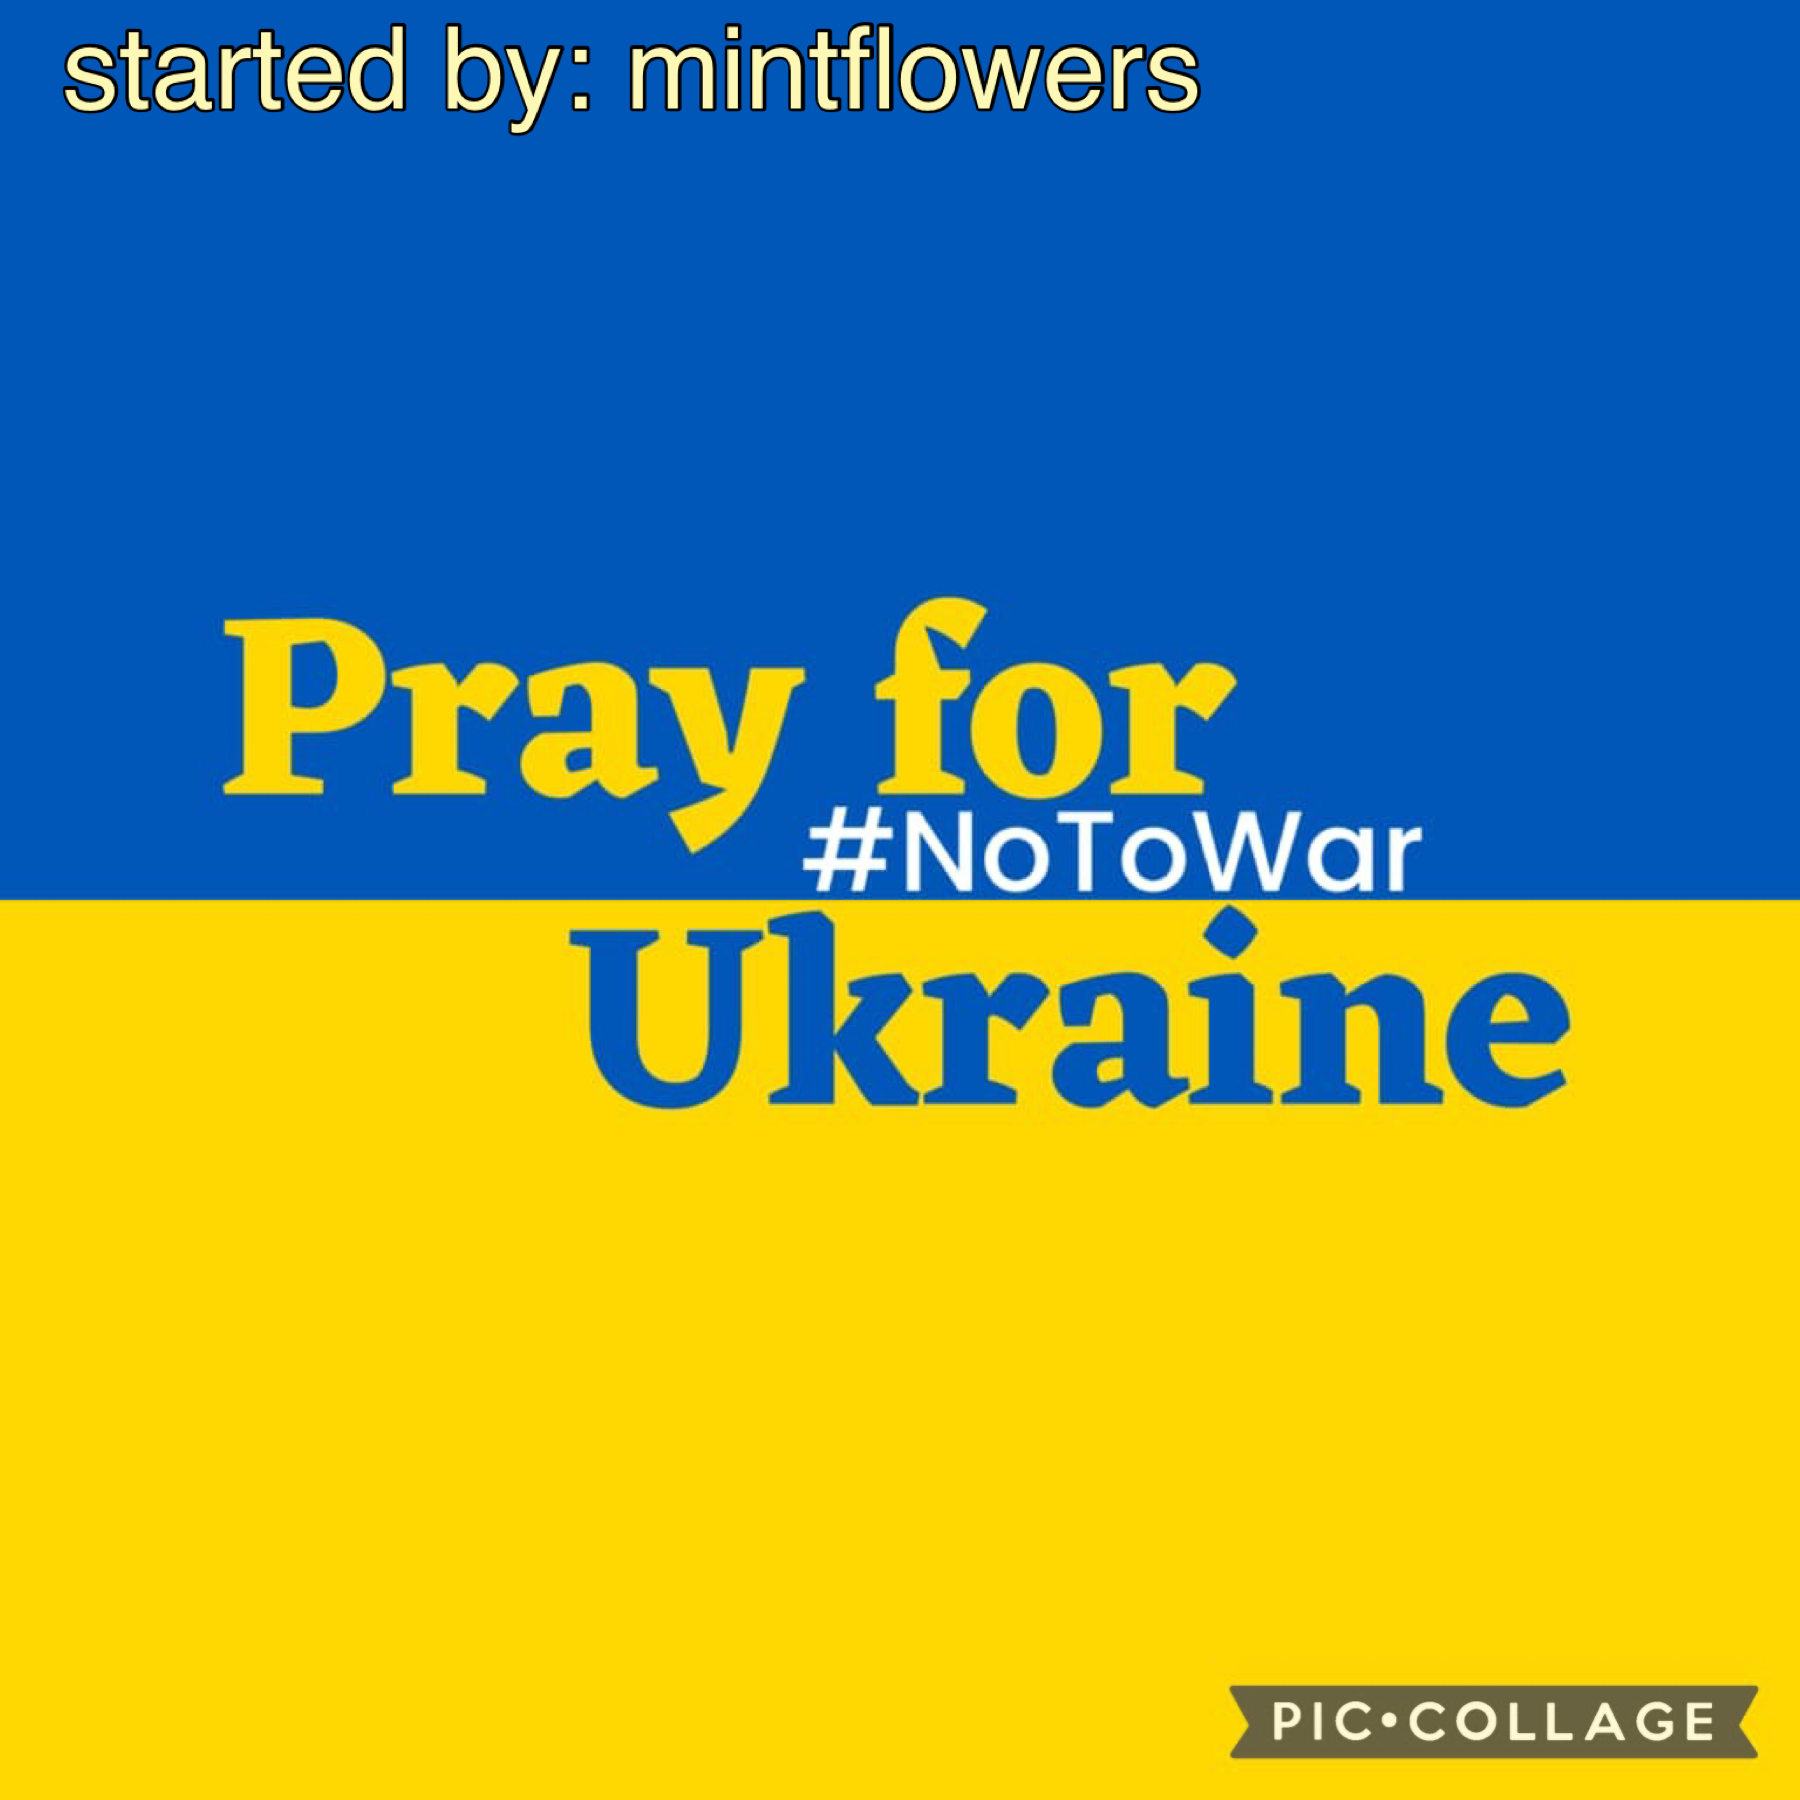 🇺🇦 pray for Ukraine 🇺🇦 (tap)
Please pray for Ukraine in these most difficult times! They are all suffering and having trouble. Please share this on social media! 💛💙💛💙
